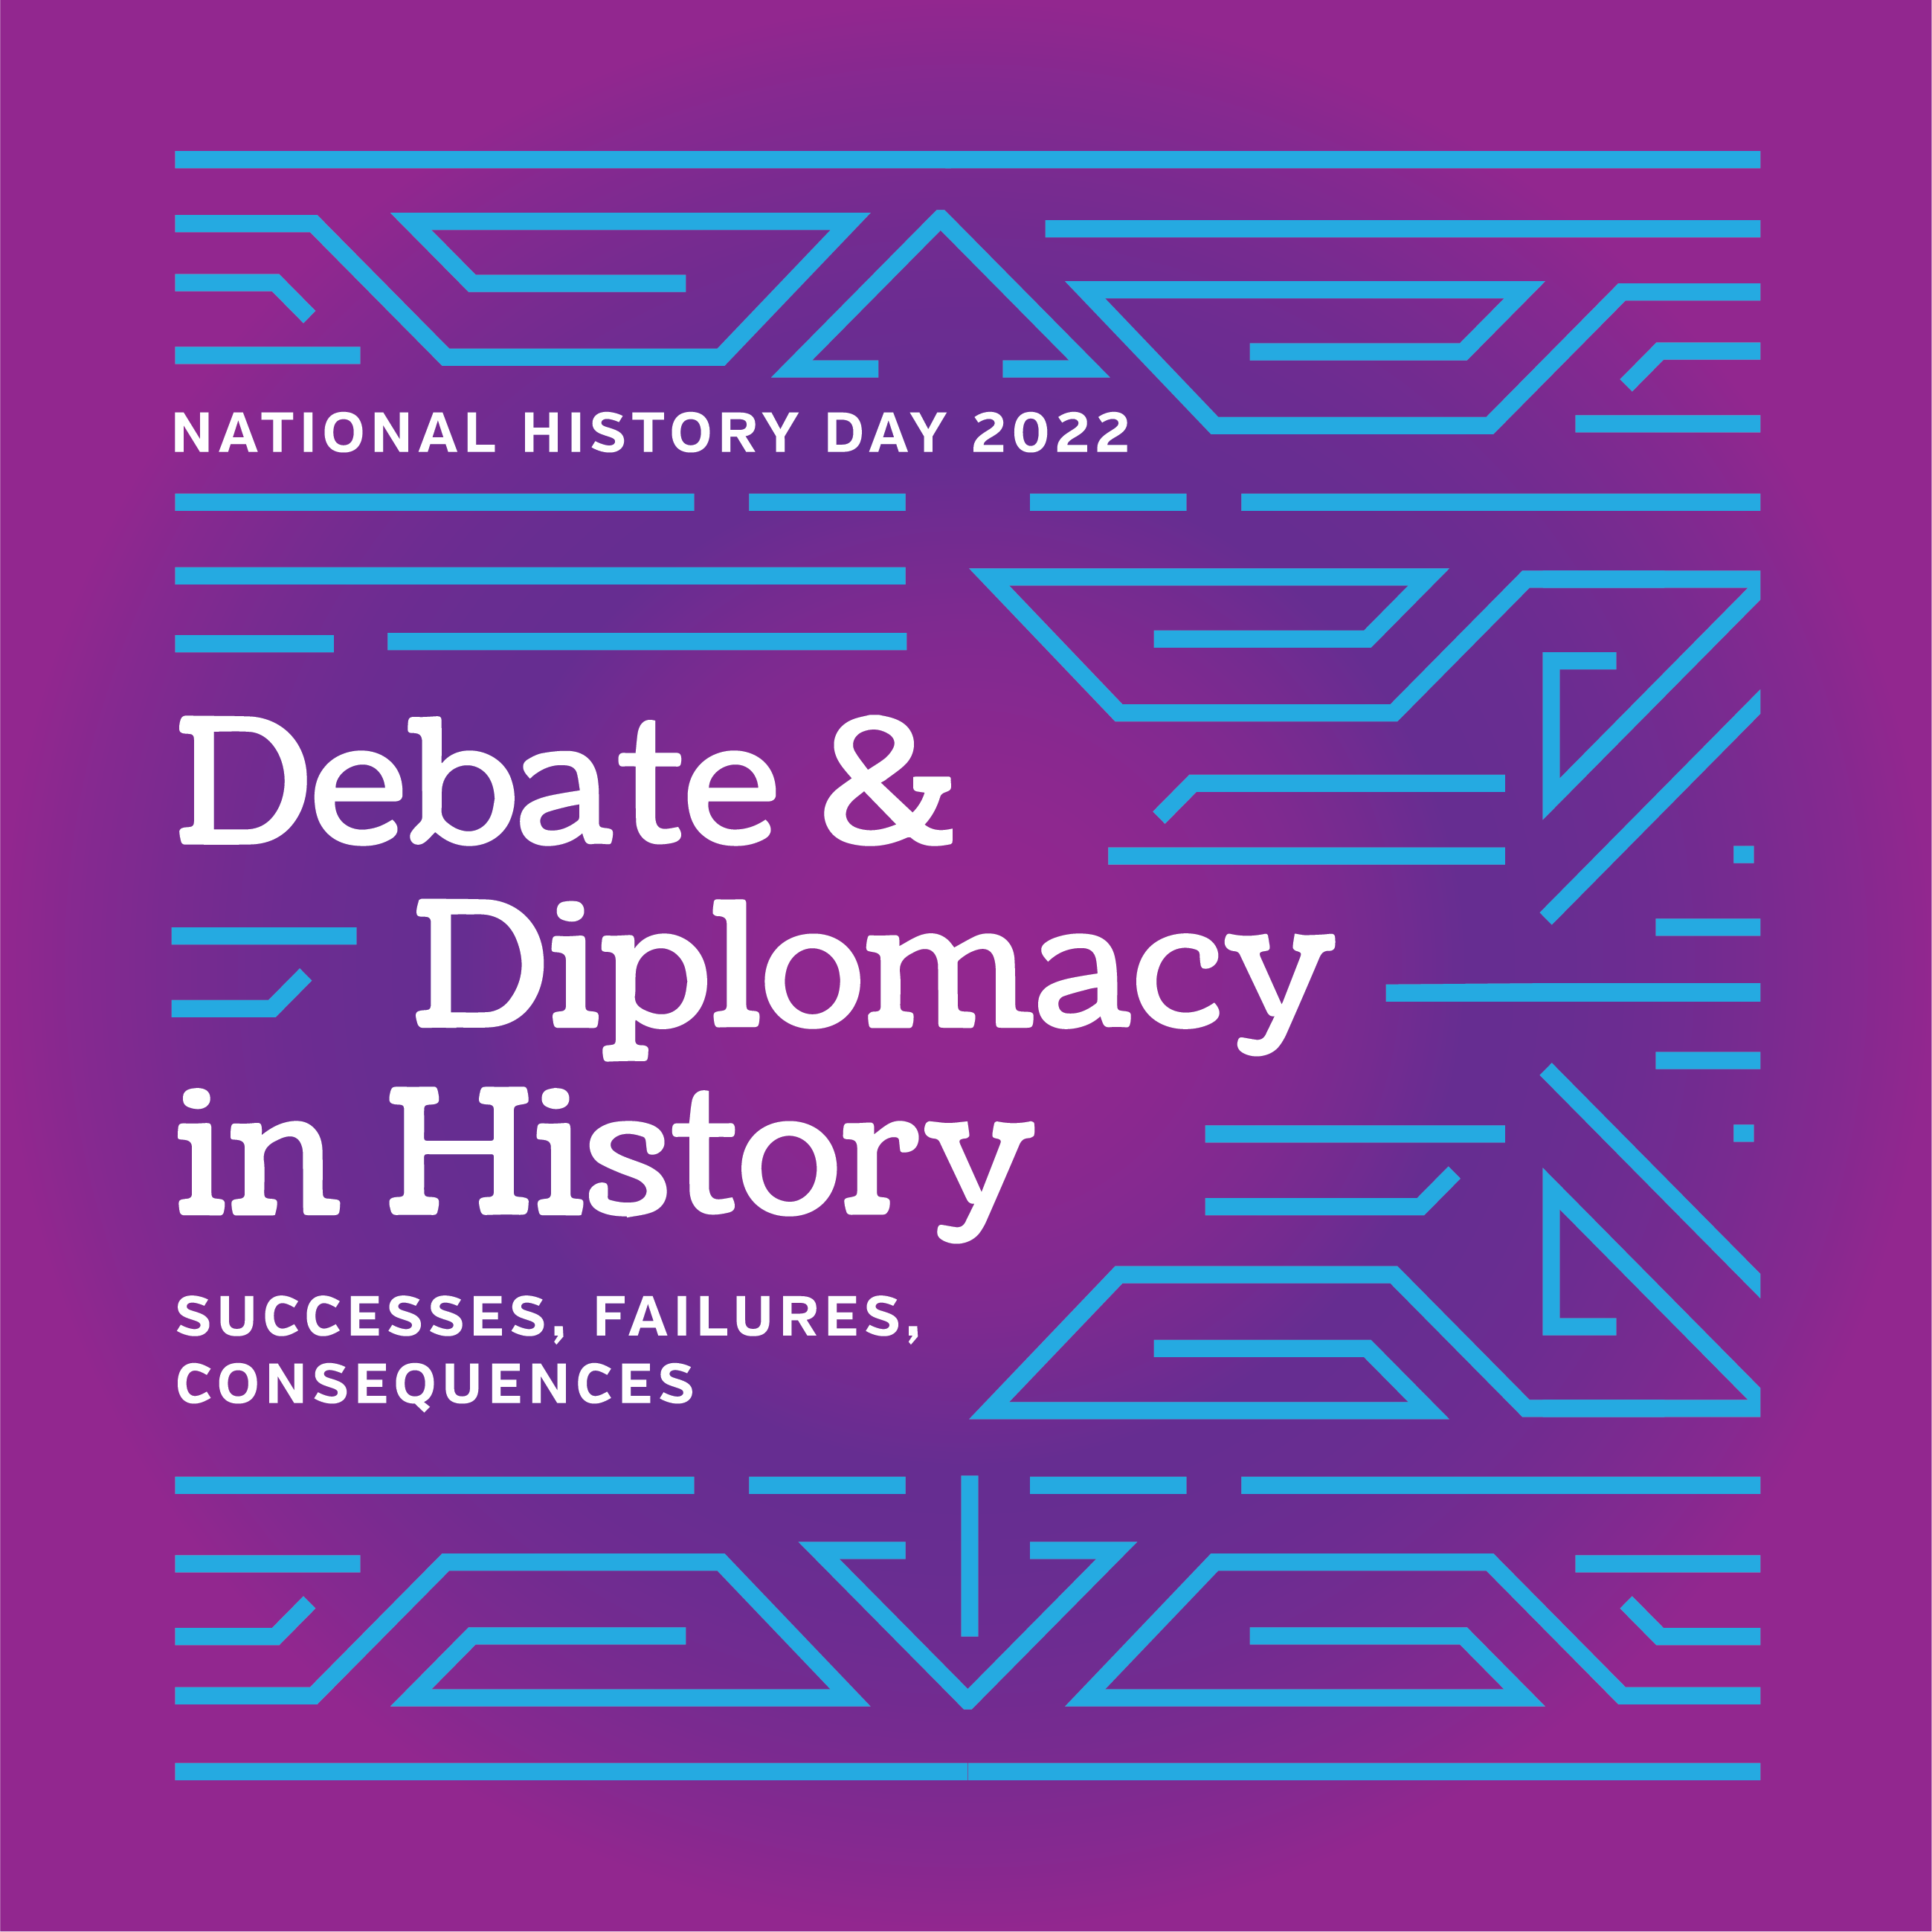 National History Day 2022